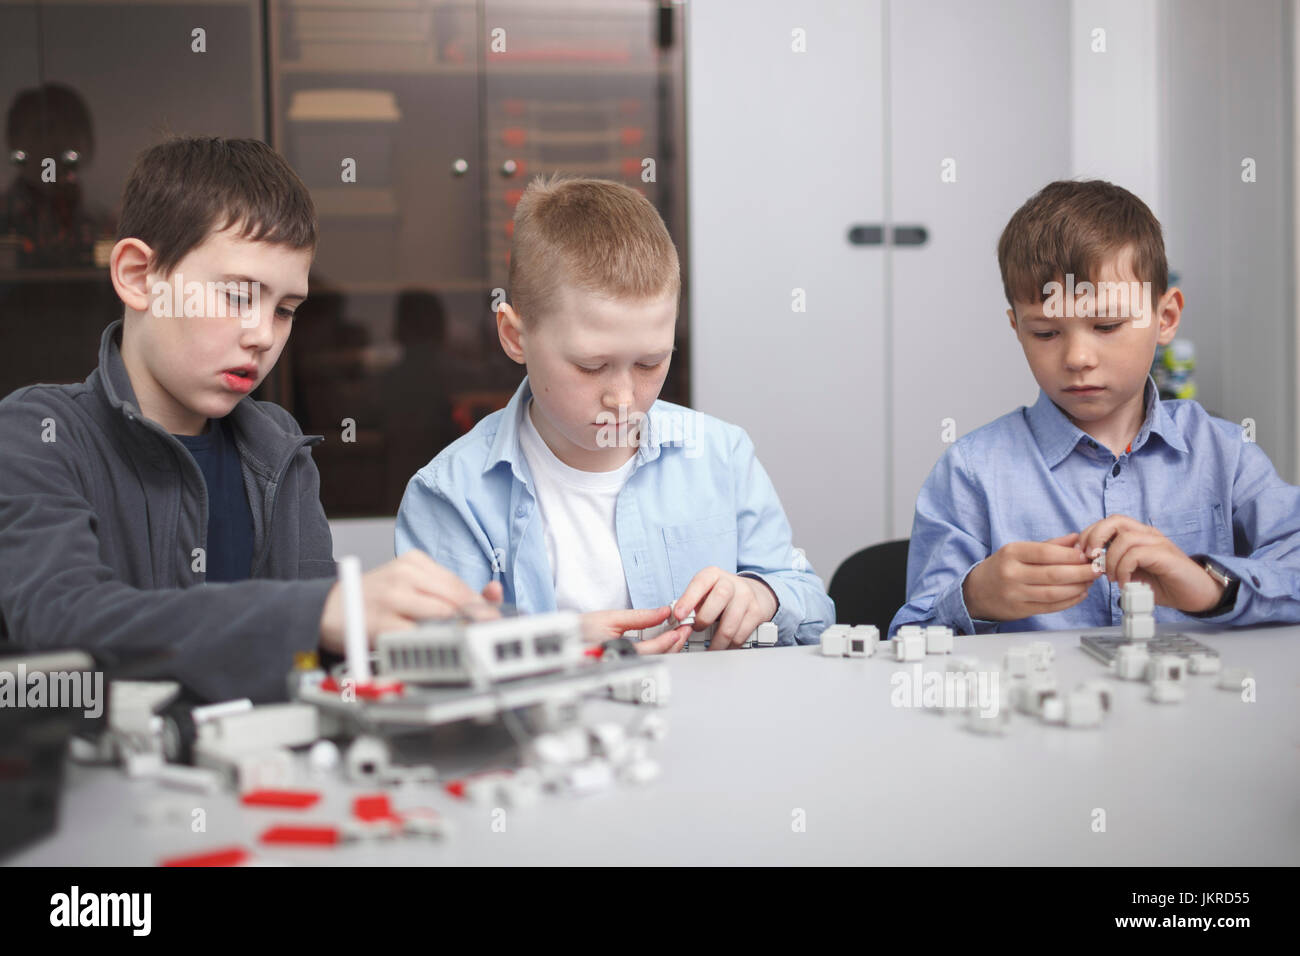 Students working on machinery at table in classroom Stock Photo